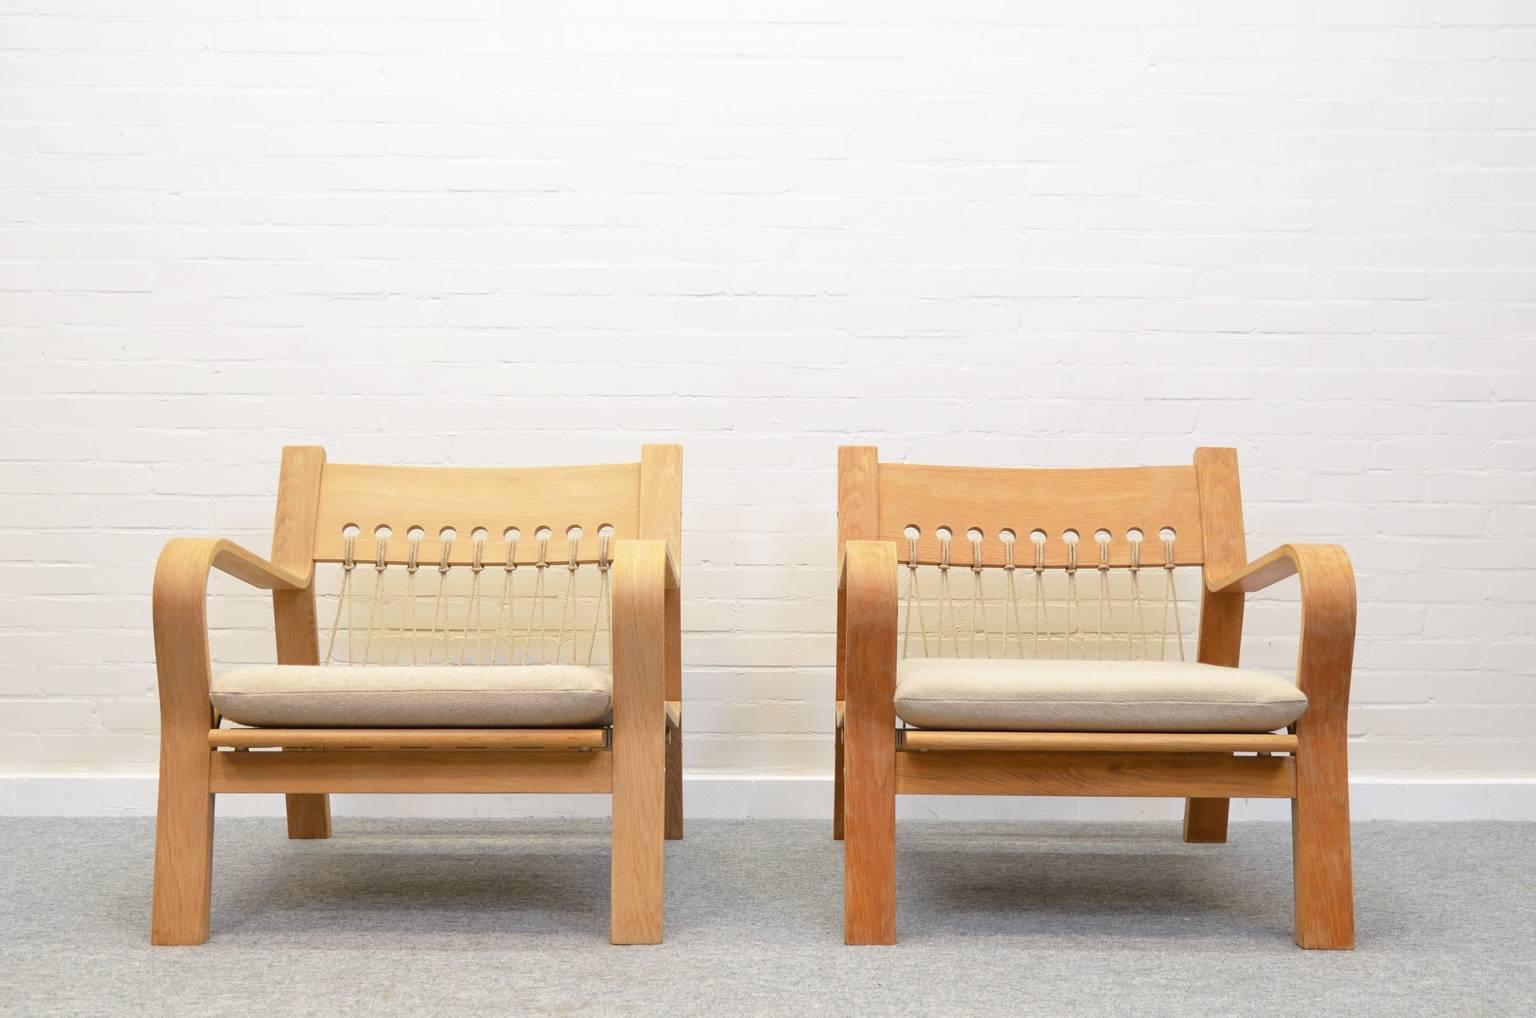 Hans Wegner GE-671 lounge chair, designed in 1967 and produced by GETAMA. Laminated oak with a flag line back, loose cushion upholstered in off-white wool. There is only one chair available, the chair on the right.